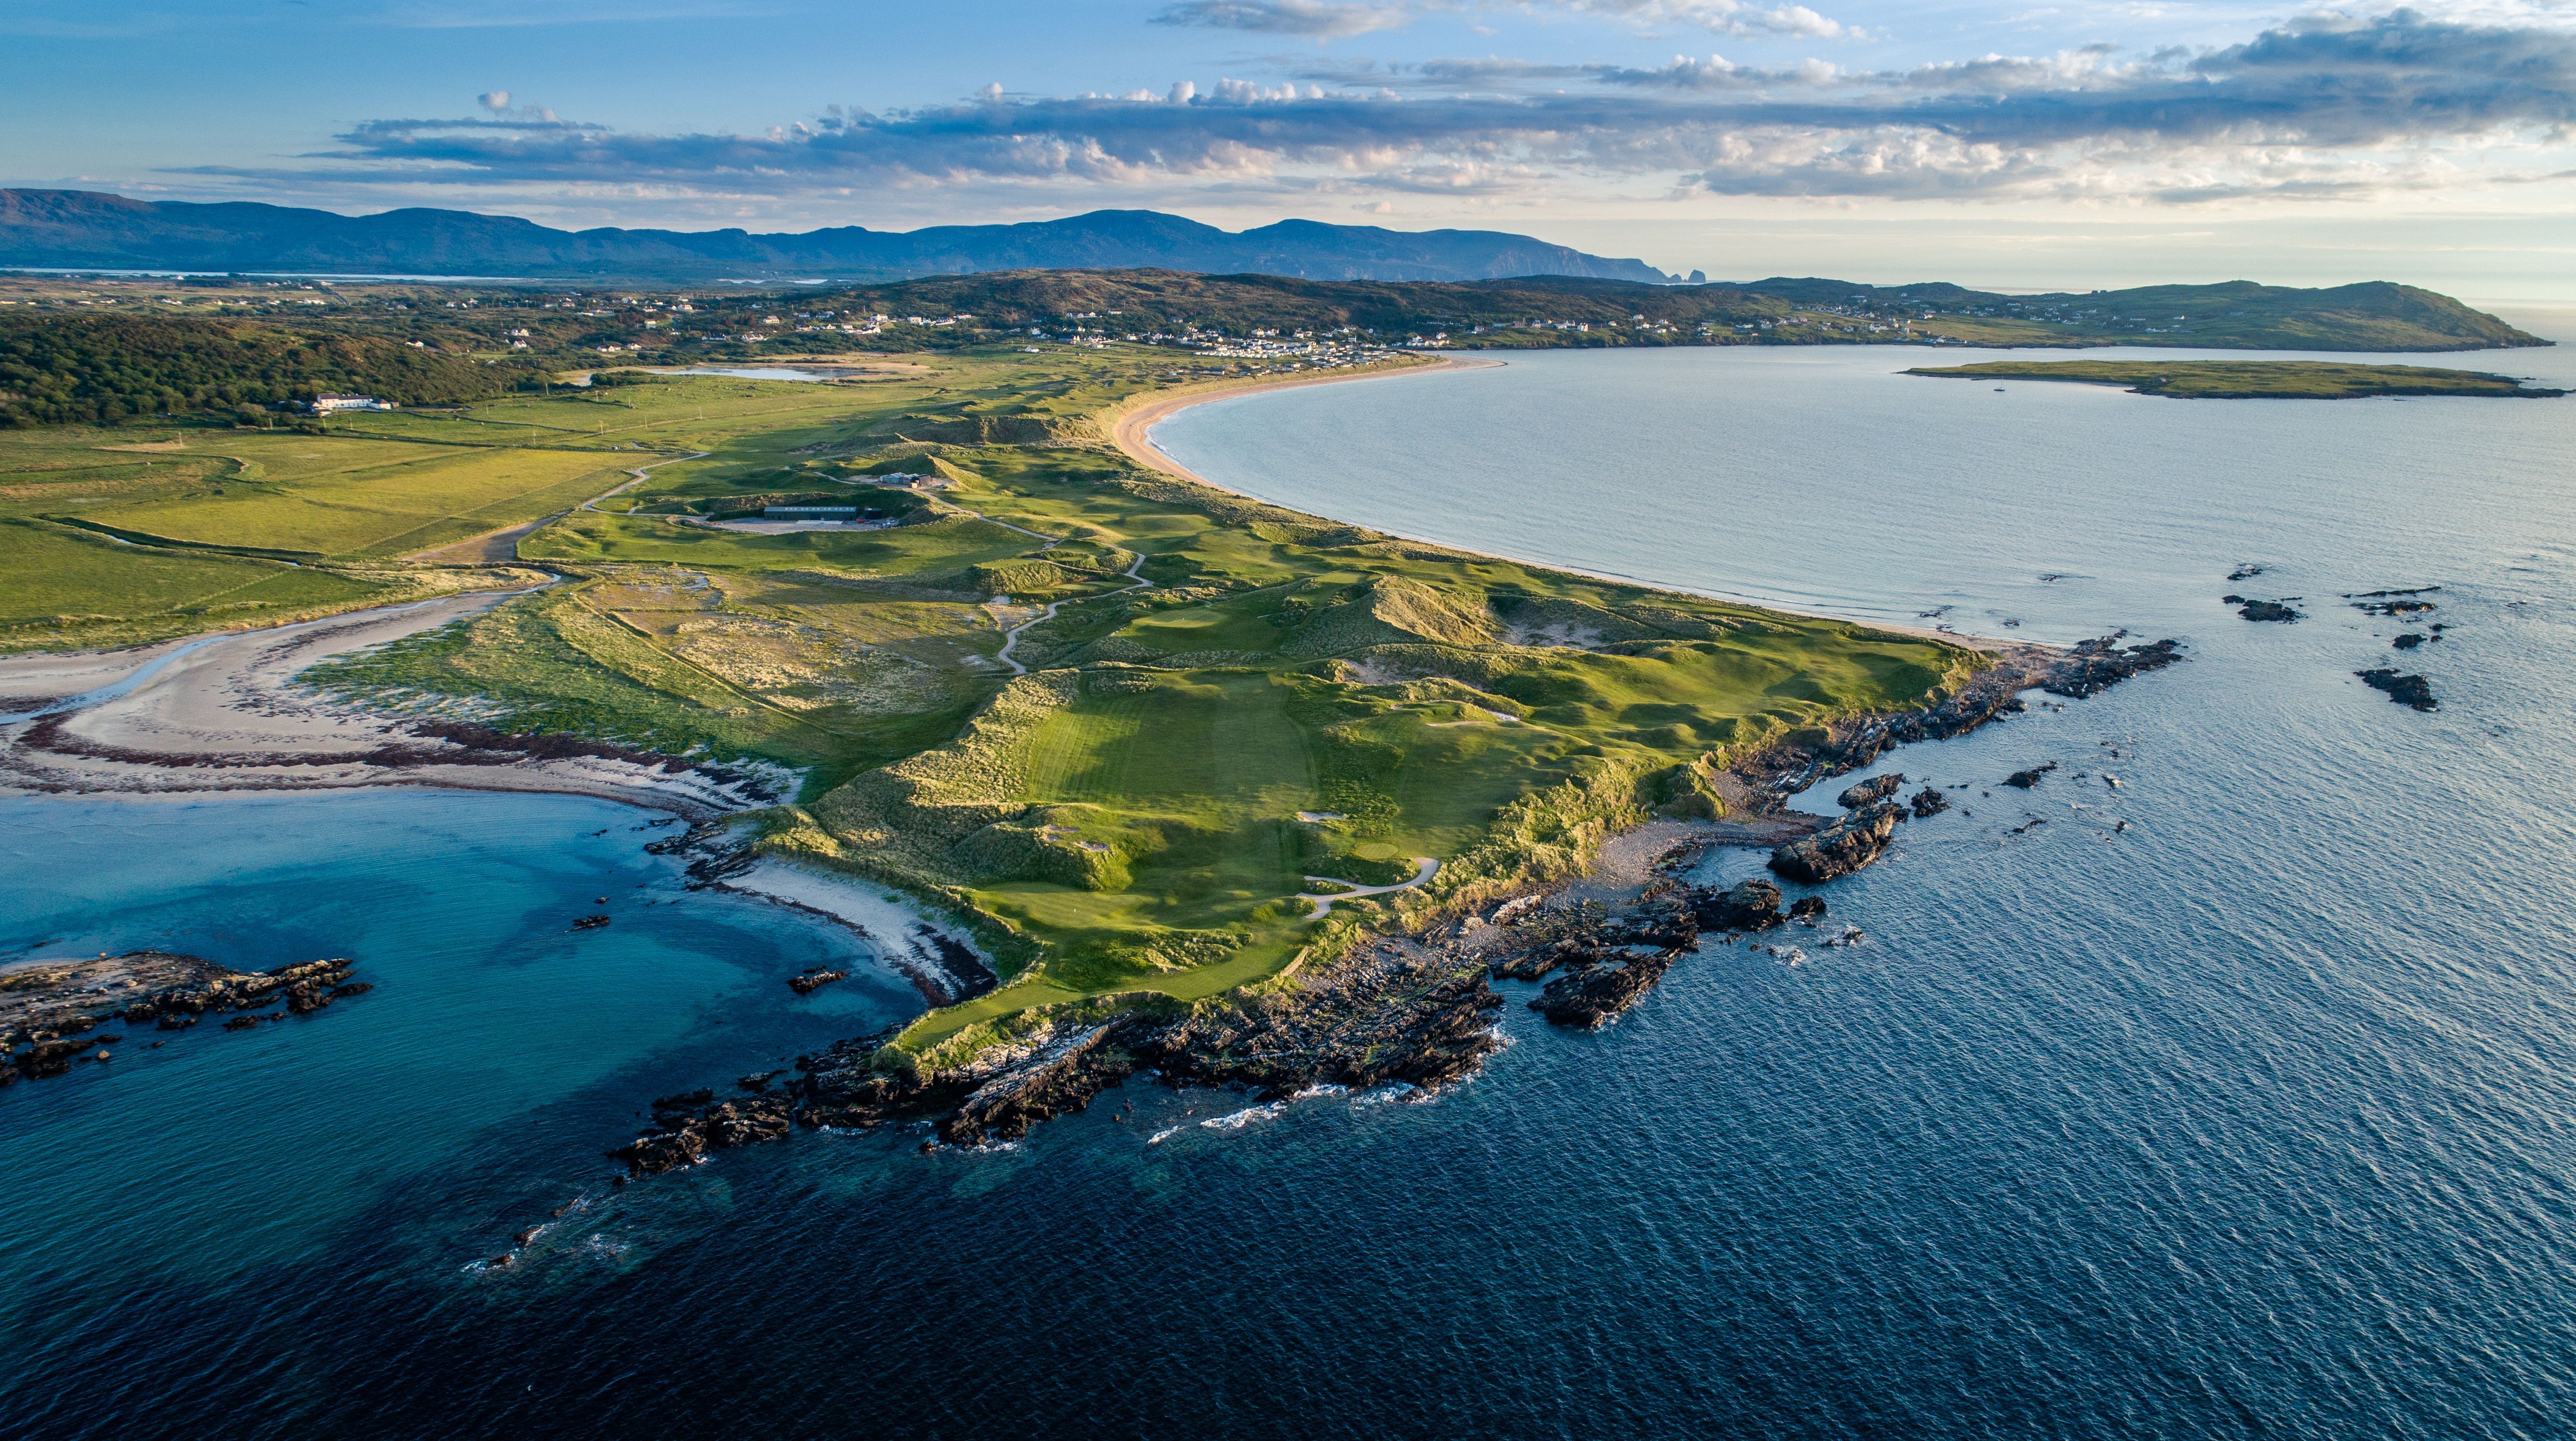 All the latest from Donegal's golf clubs - Donegal Live